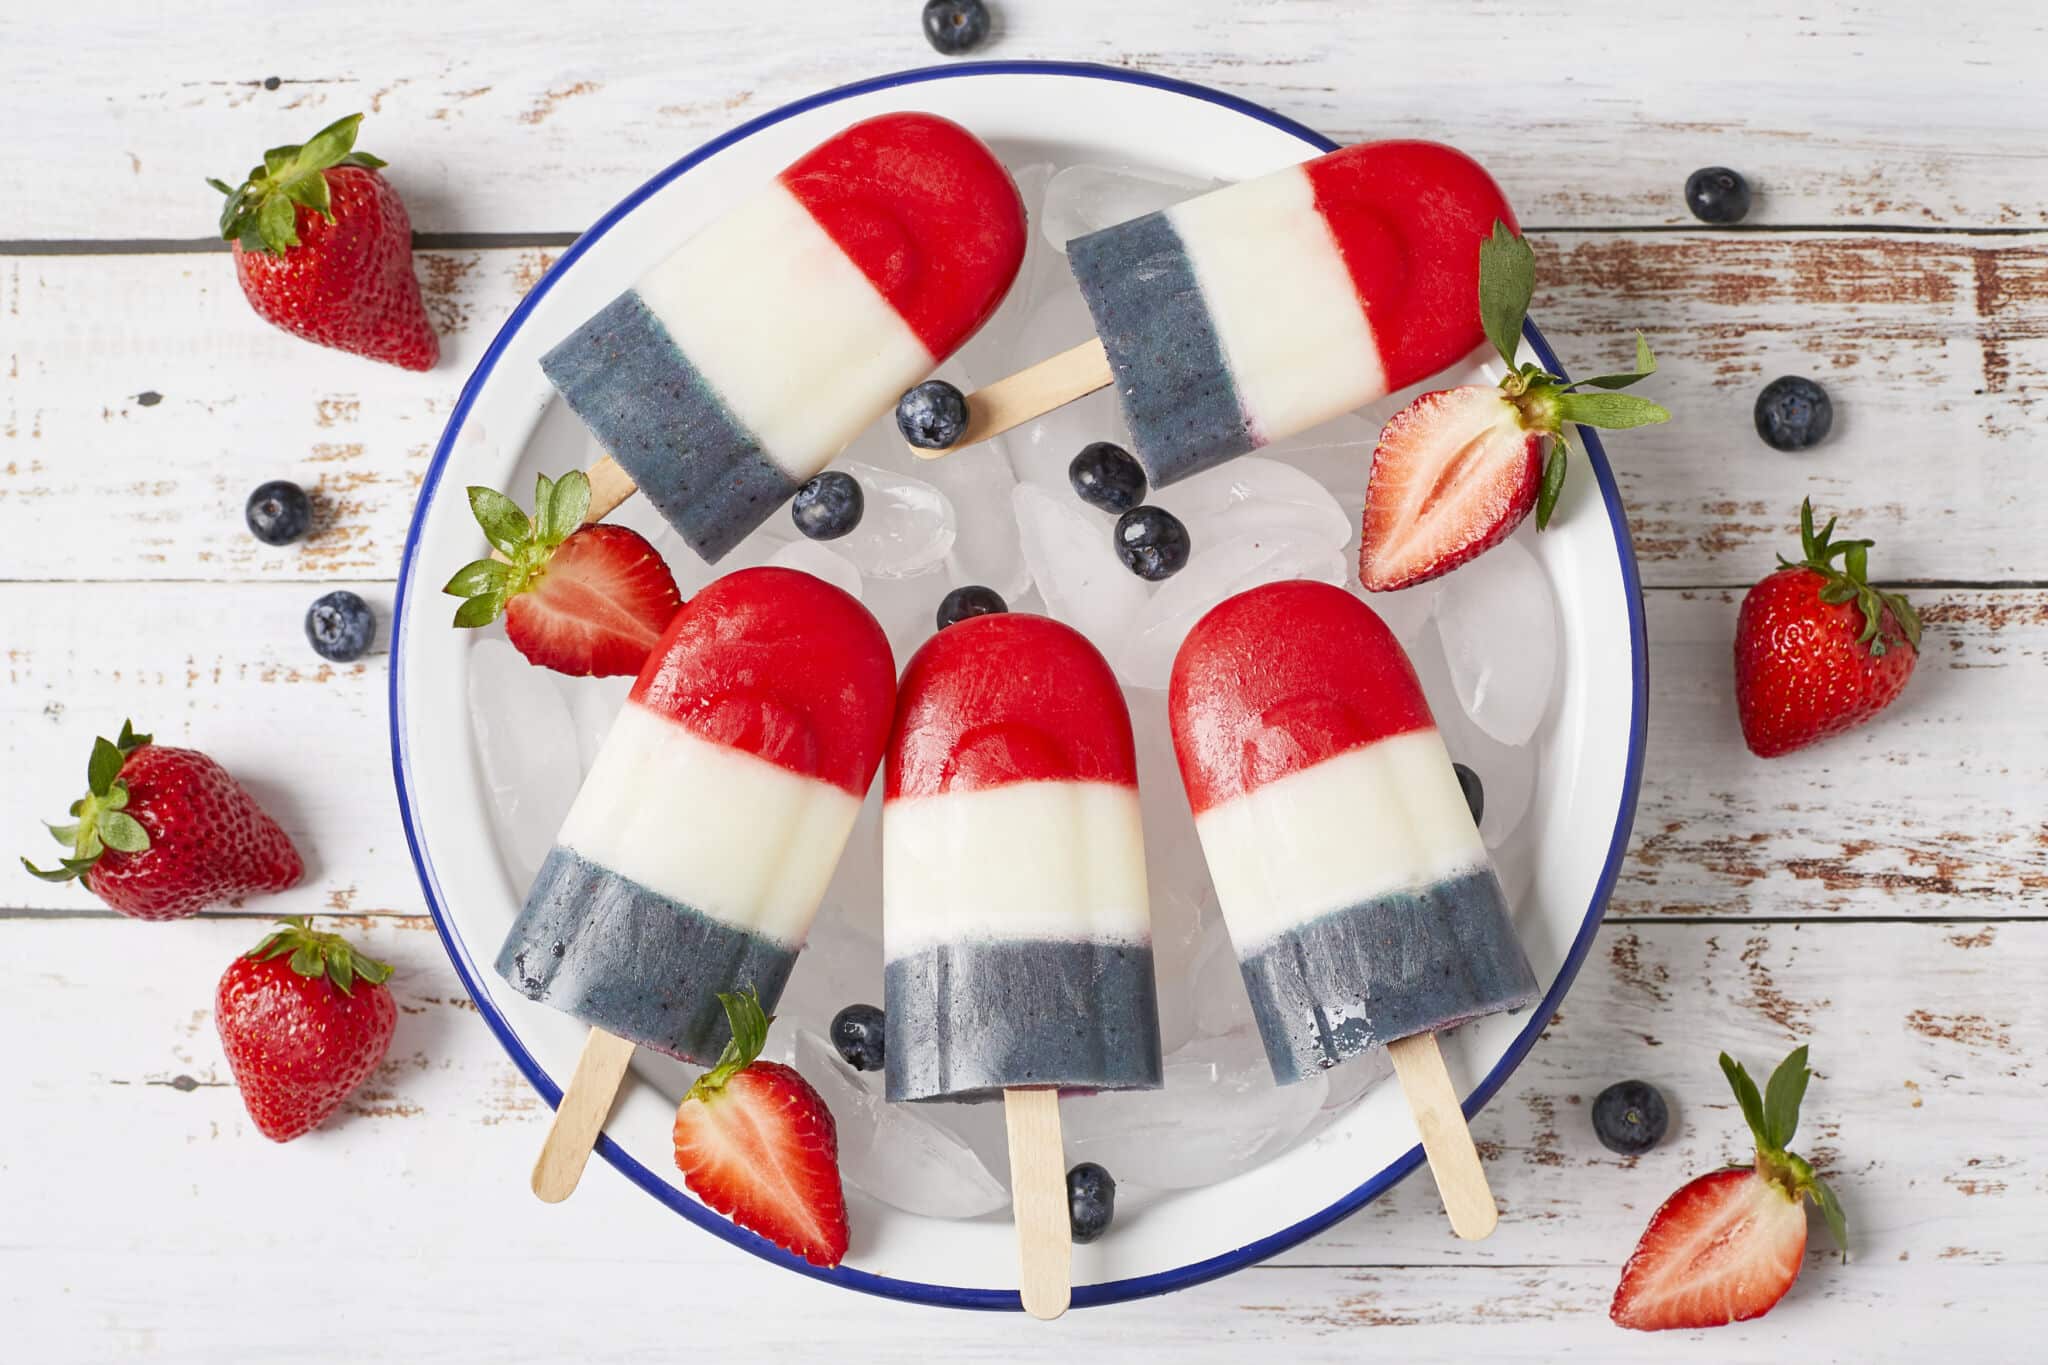 5 Homemade Bomb Pop Popsicles with vibrant red, white and blue colors, served on a round blue-edged white enamel platter with ice cubes. Fresh blueberries and strawberries are on the platter and around the platter.